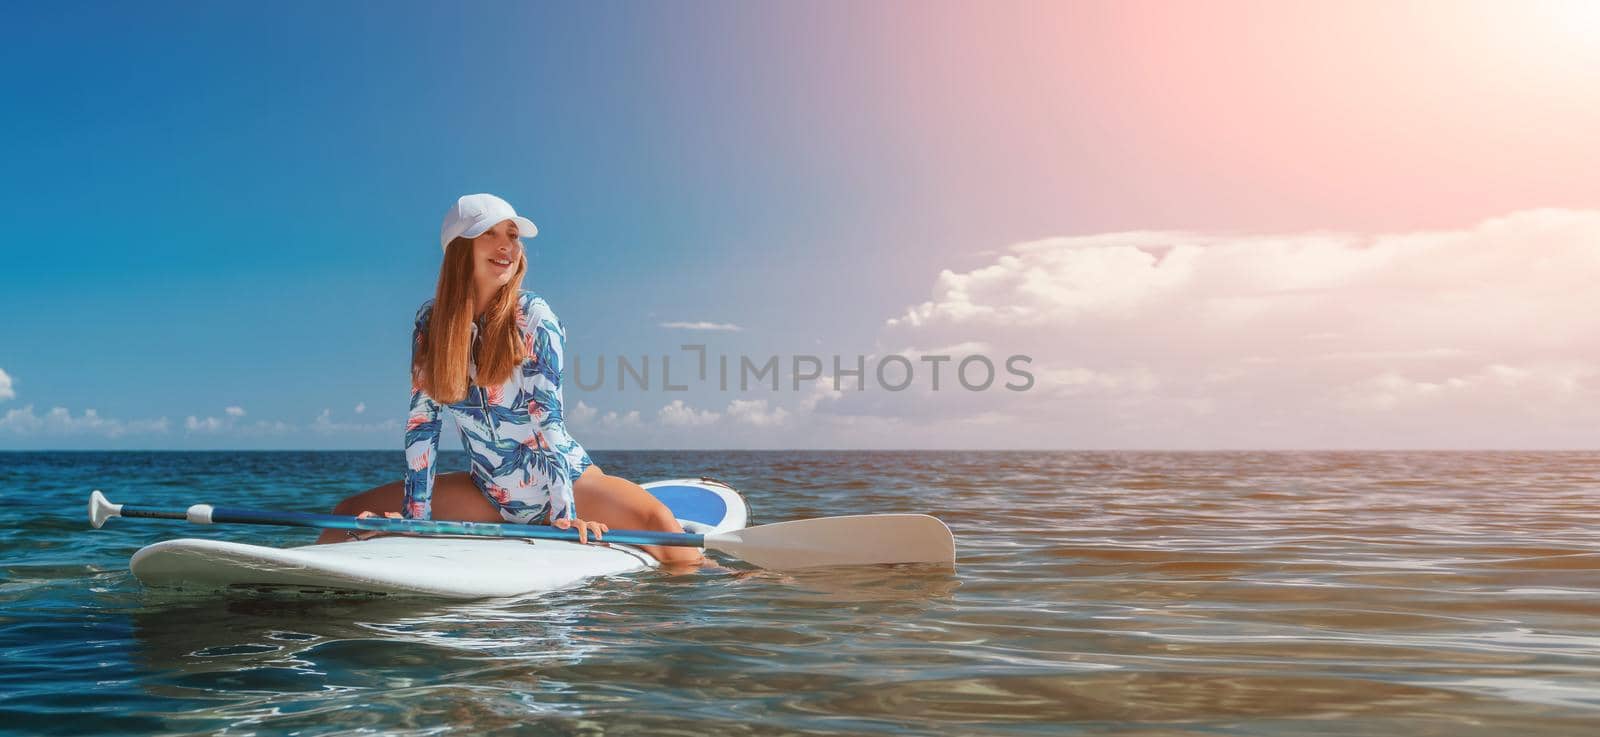 Healthy happy fit woman in bikini relaxing on a sup surfboard, floating on the clear turquoise sea water. Recreational Sports. Stand Up Paddle boarding. Summer fun, holidays travel. Active lifestyle by panophotograph